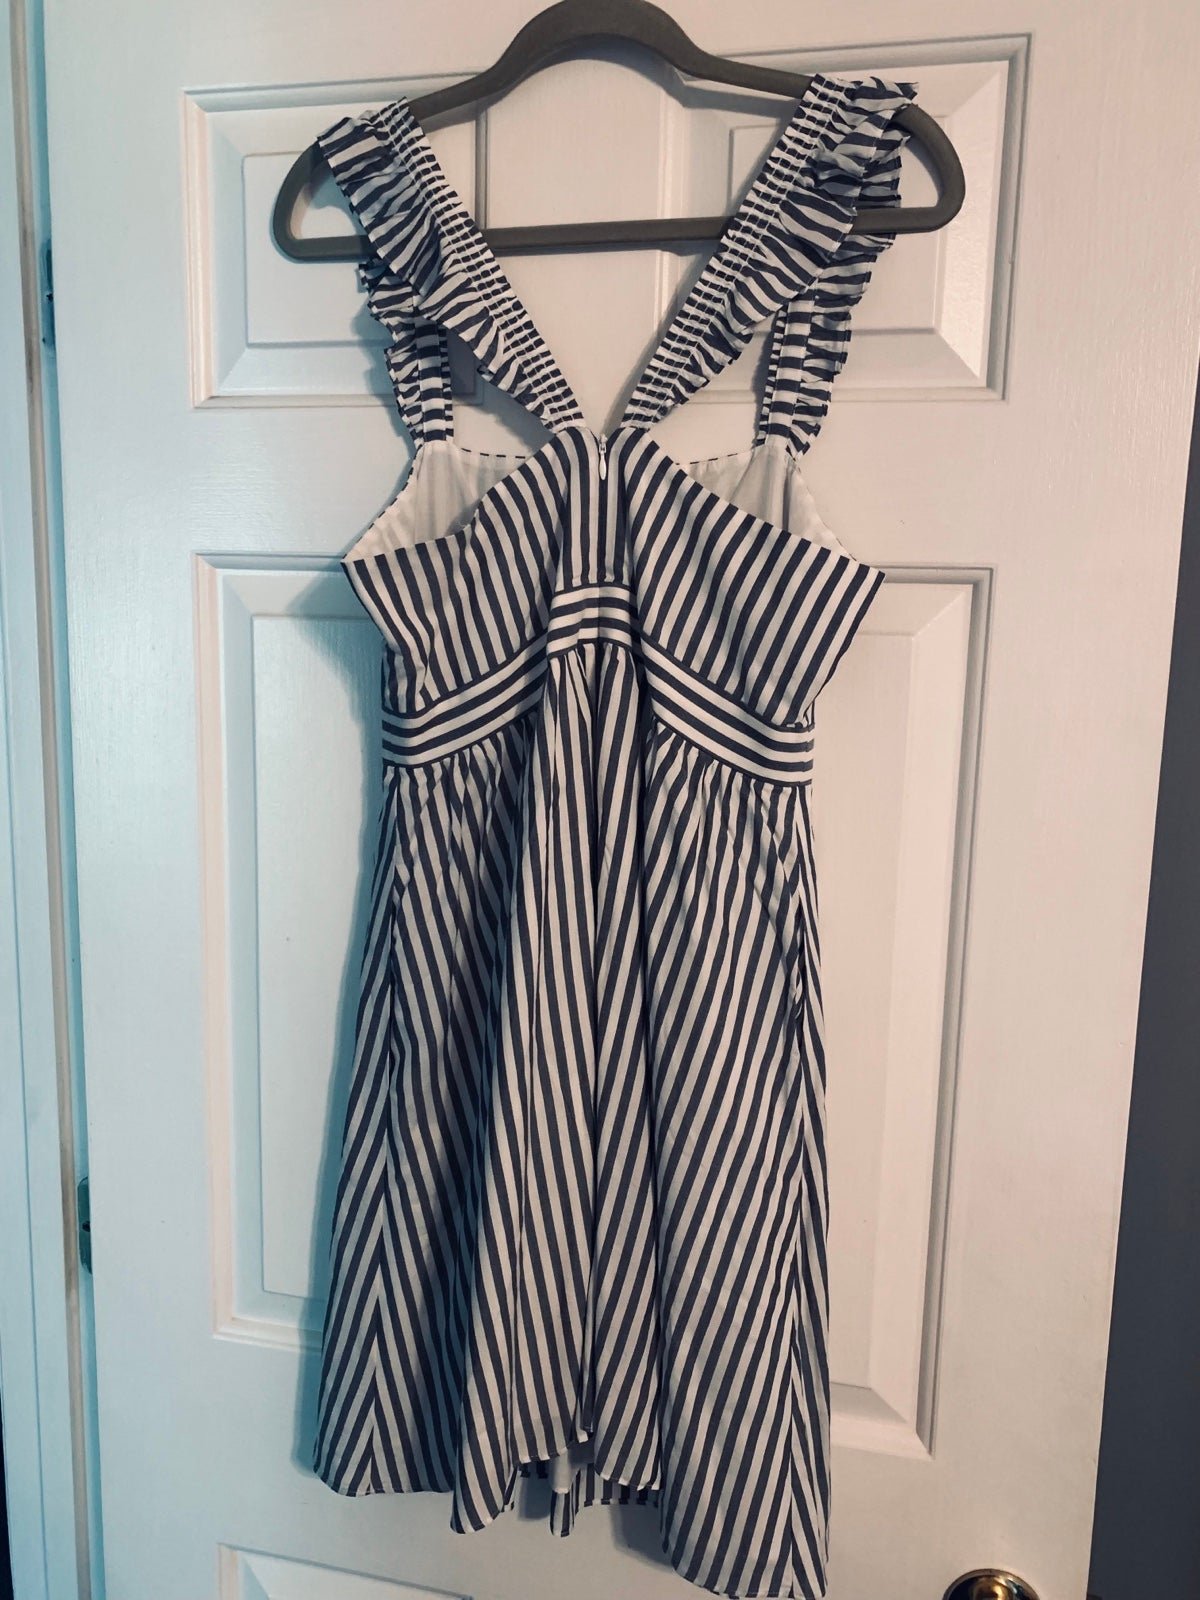 high discount Ladies Madewell Striped Ruffle-Strap Empire Dress Lined Gray White Size 4 ftV9PDShY Buying Cheap